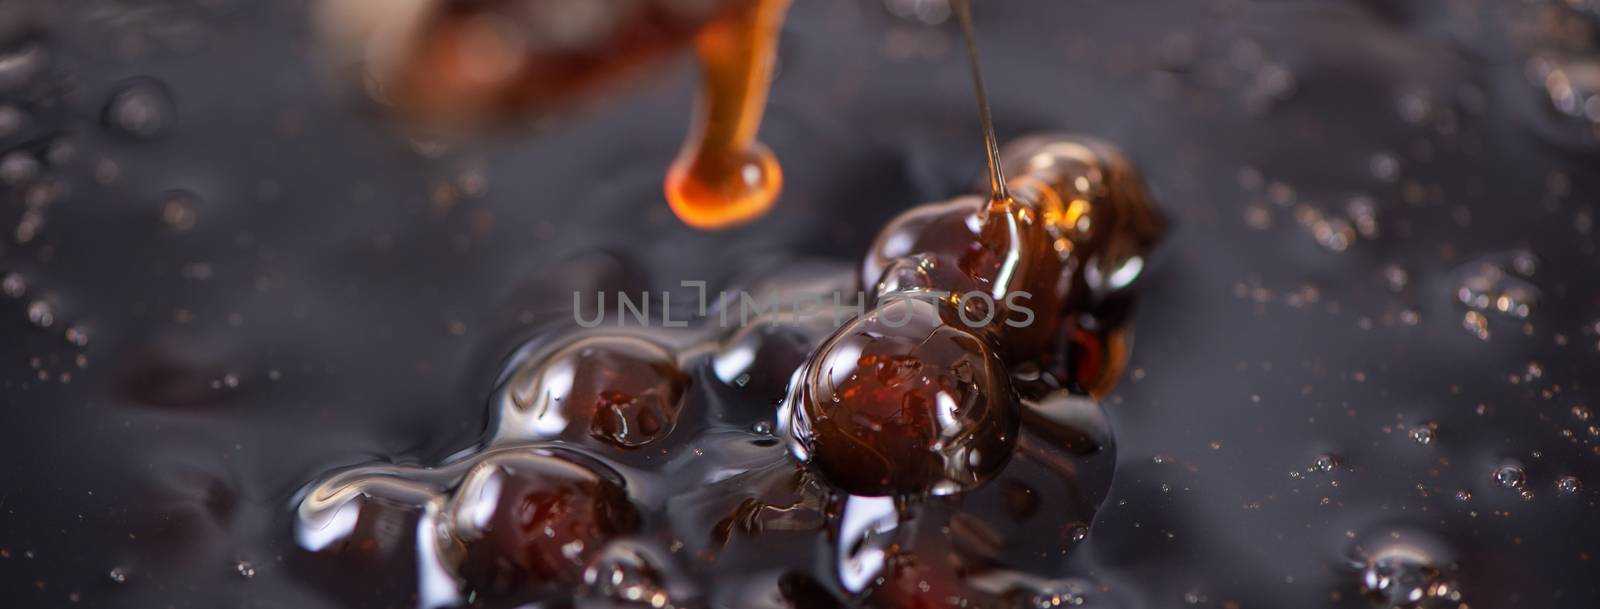 Cooking, boiling brown sugar flavored tapioca pearl balls, ingredient of bubble tea, preparing food and drink, close up, recipe cookbook steps design concept.